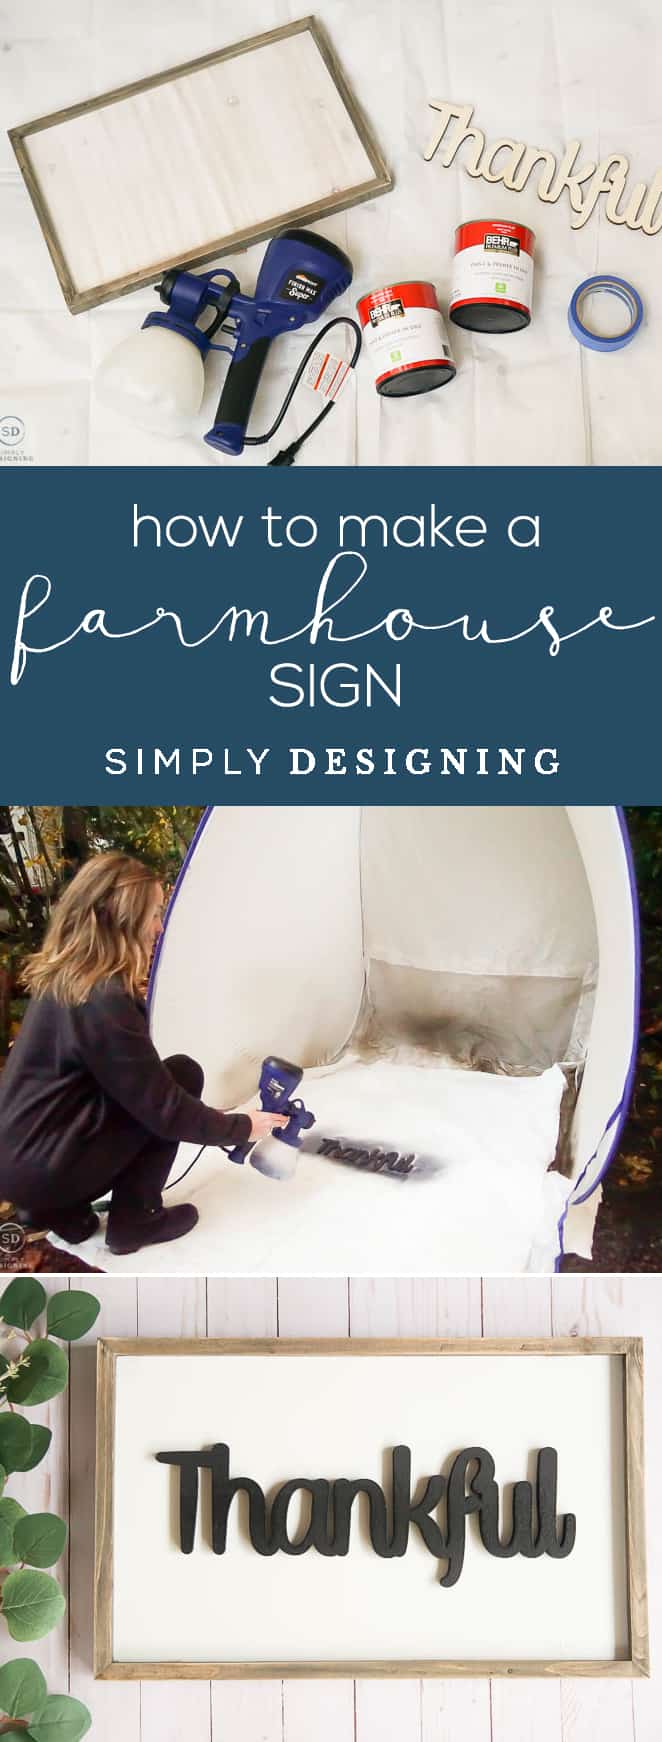 How to make a farmhouse sign - Save your time and money and make your own farmhouse sign instead of buying it with these tips for how to make a farmhouse sign